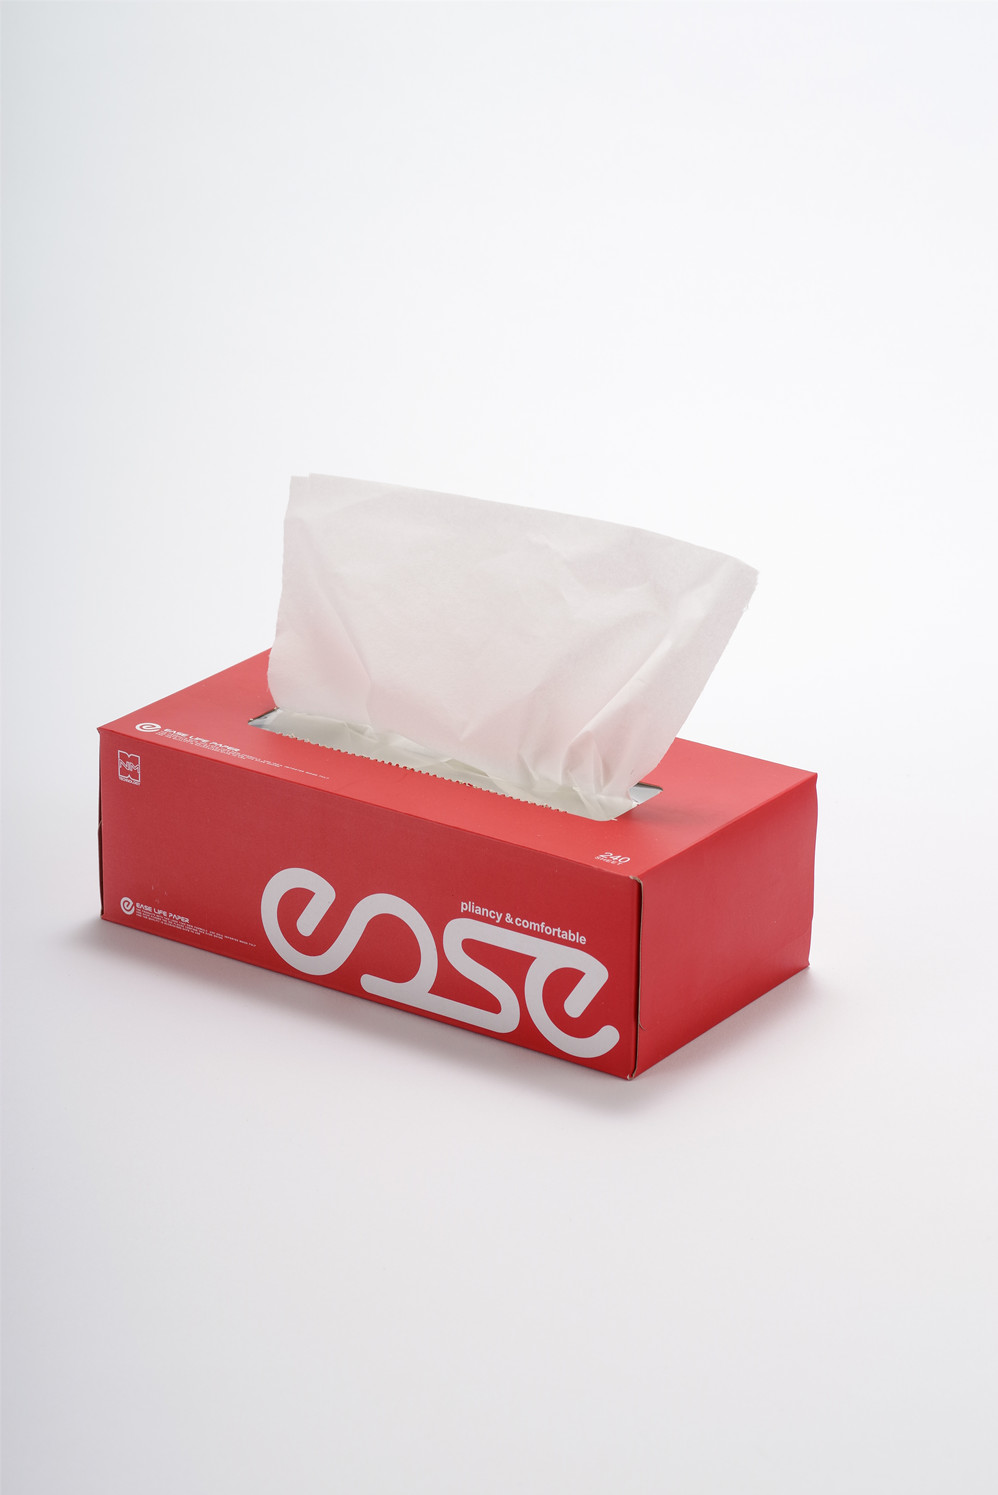 High quality facial tissues for hotels